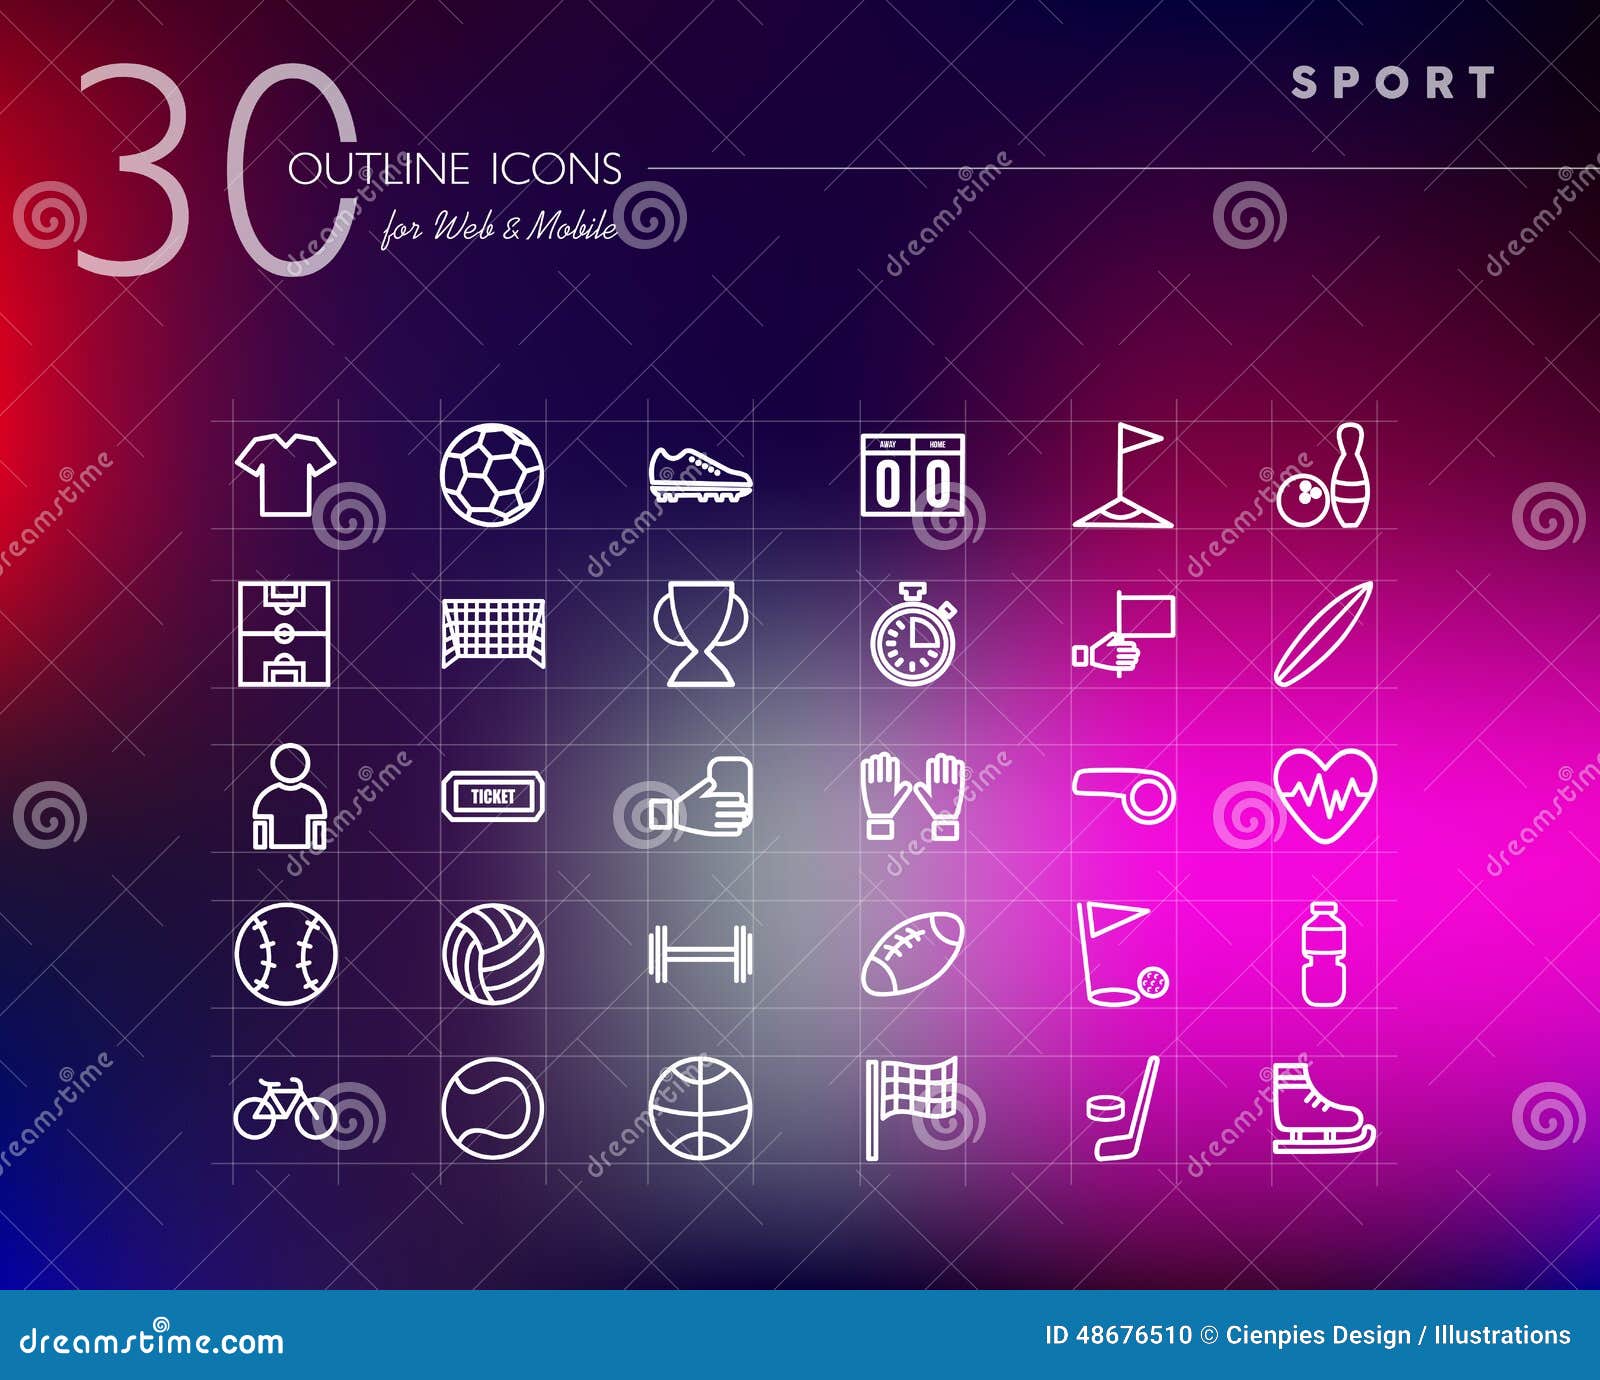 sports outline icons set